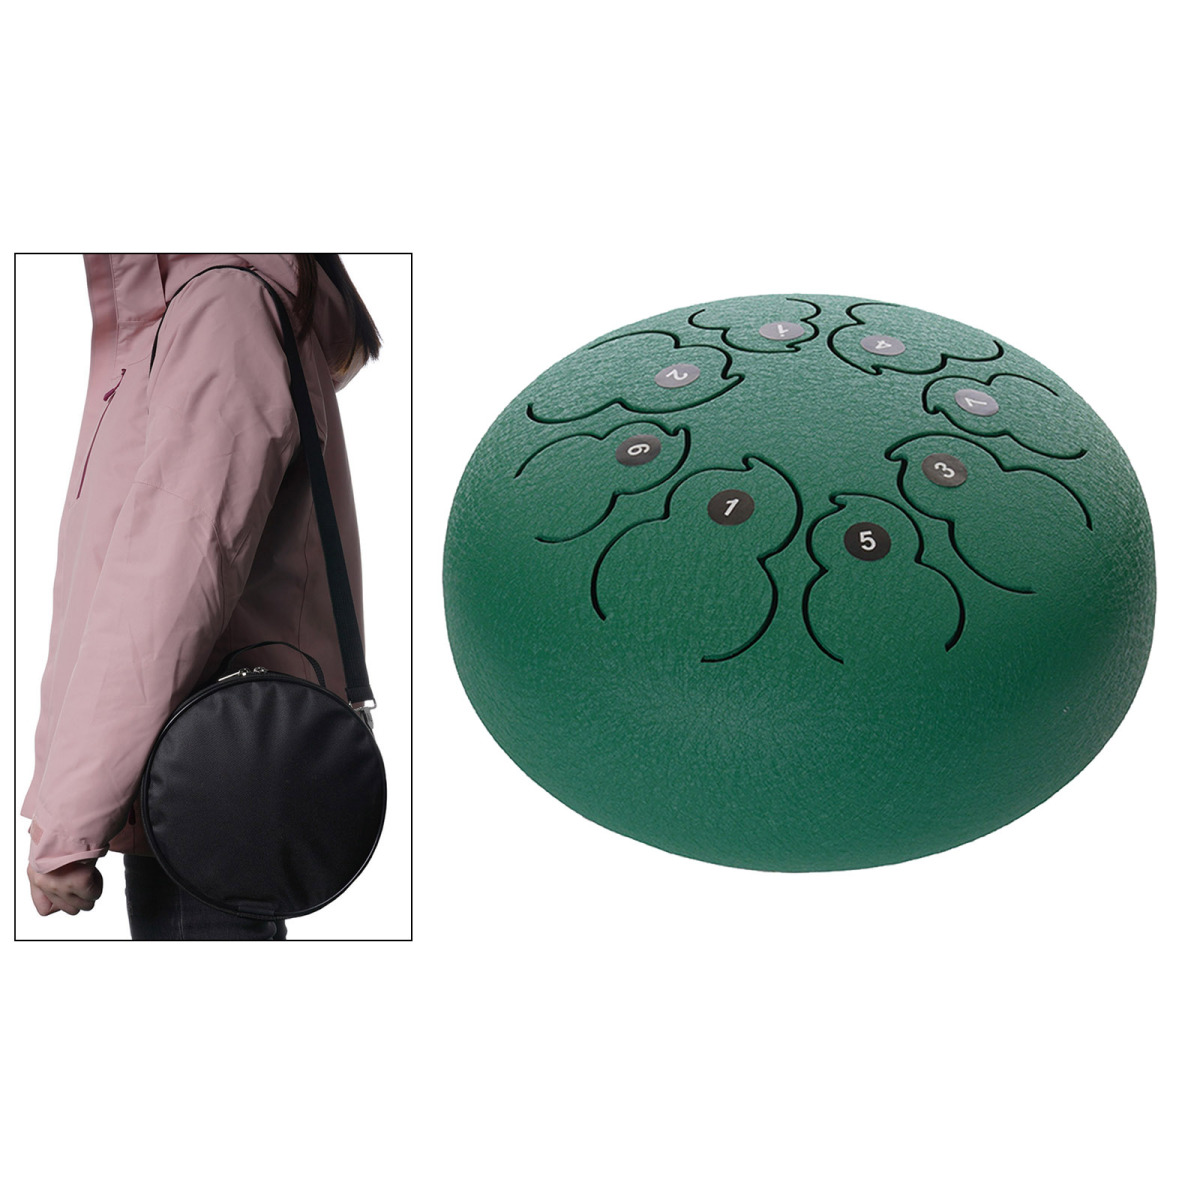  steel . drum 8 -inch 8 Note c- key handpan drum bag. cup ru. bell z music education concert yoga .. therefore. wai pin g Cross. green 